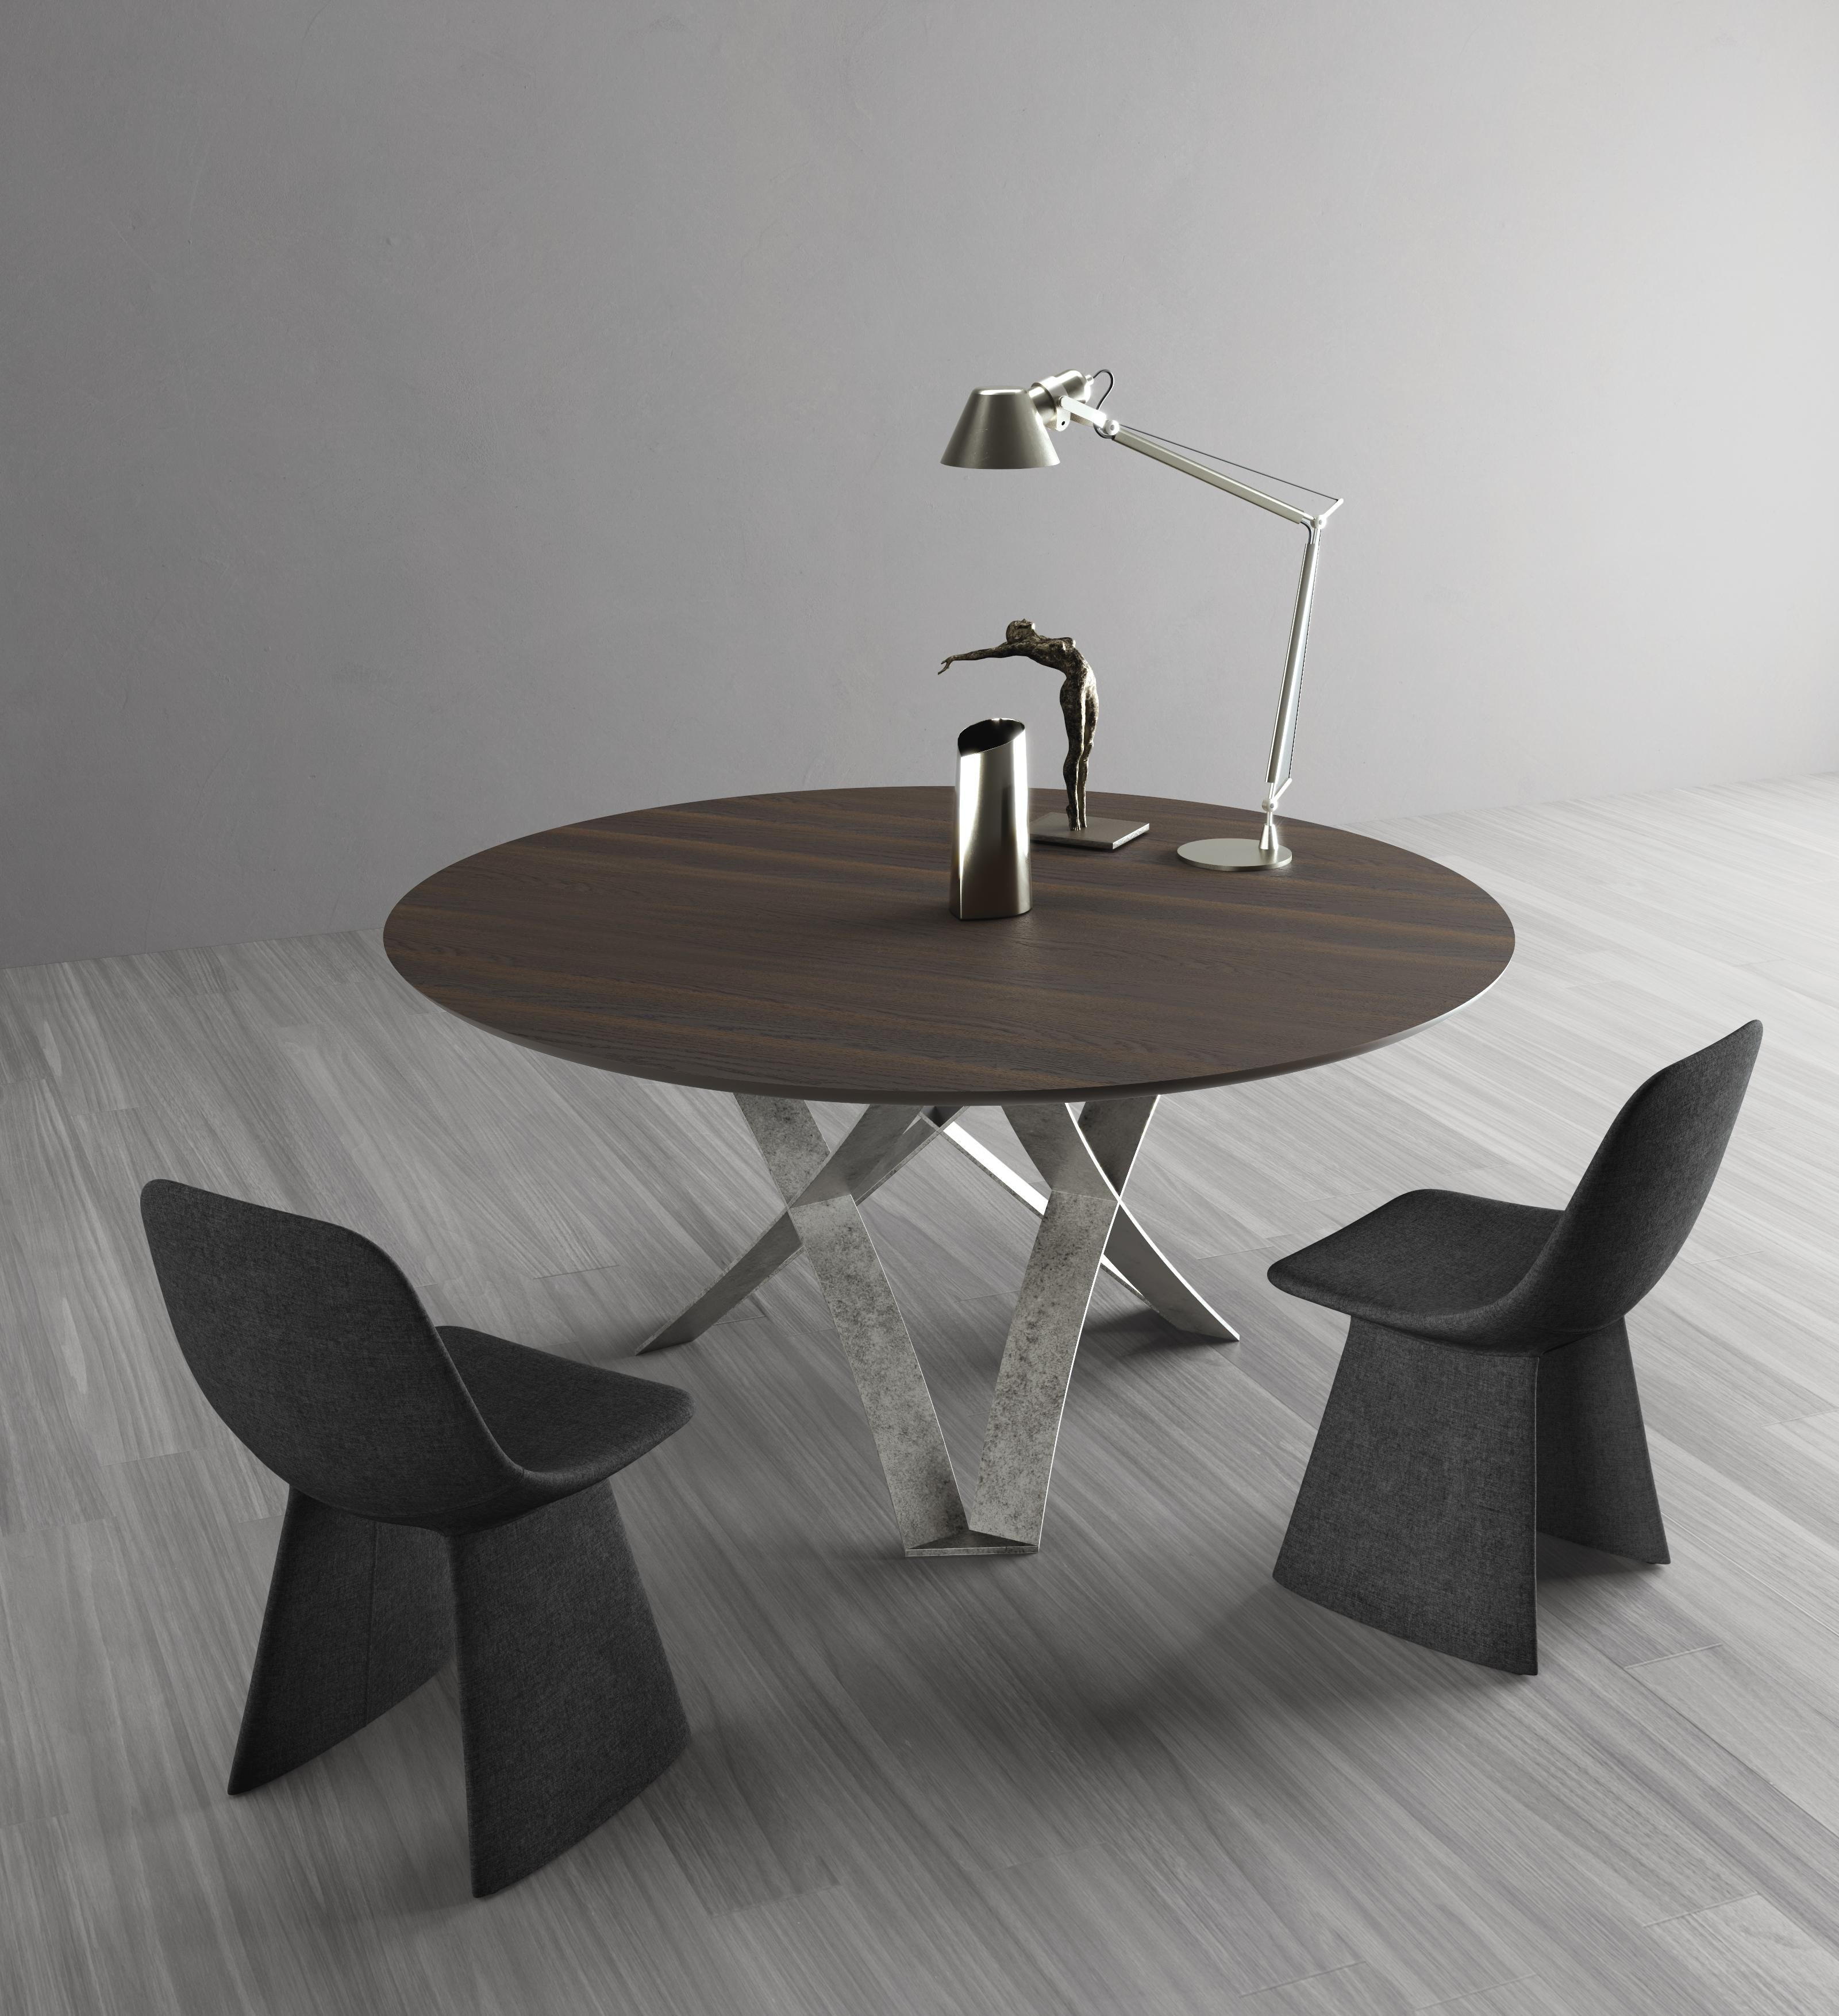 Dioniso Dining Table by Chinellato Design
Dimensions: D 160 x H 73 cm
Materials:
Top: thermally treated oak top.
Base: Black patinated silver-finished.

Round dining table available in two sizes, offered with three combinations of base and Top